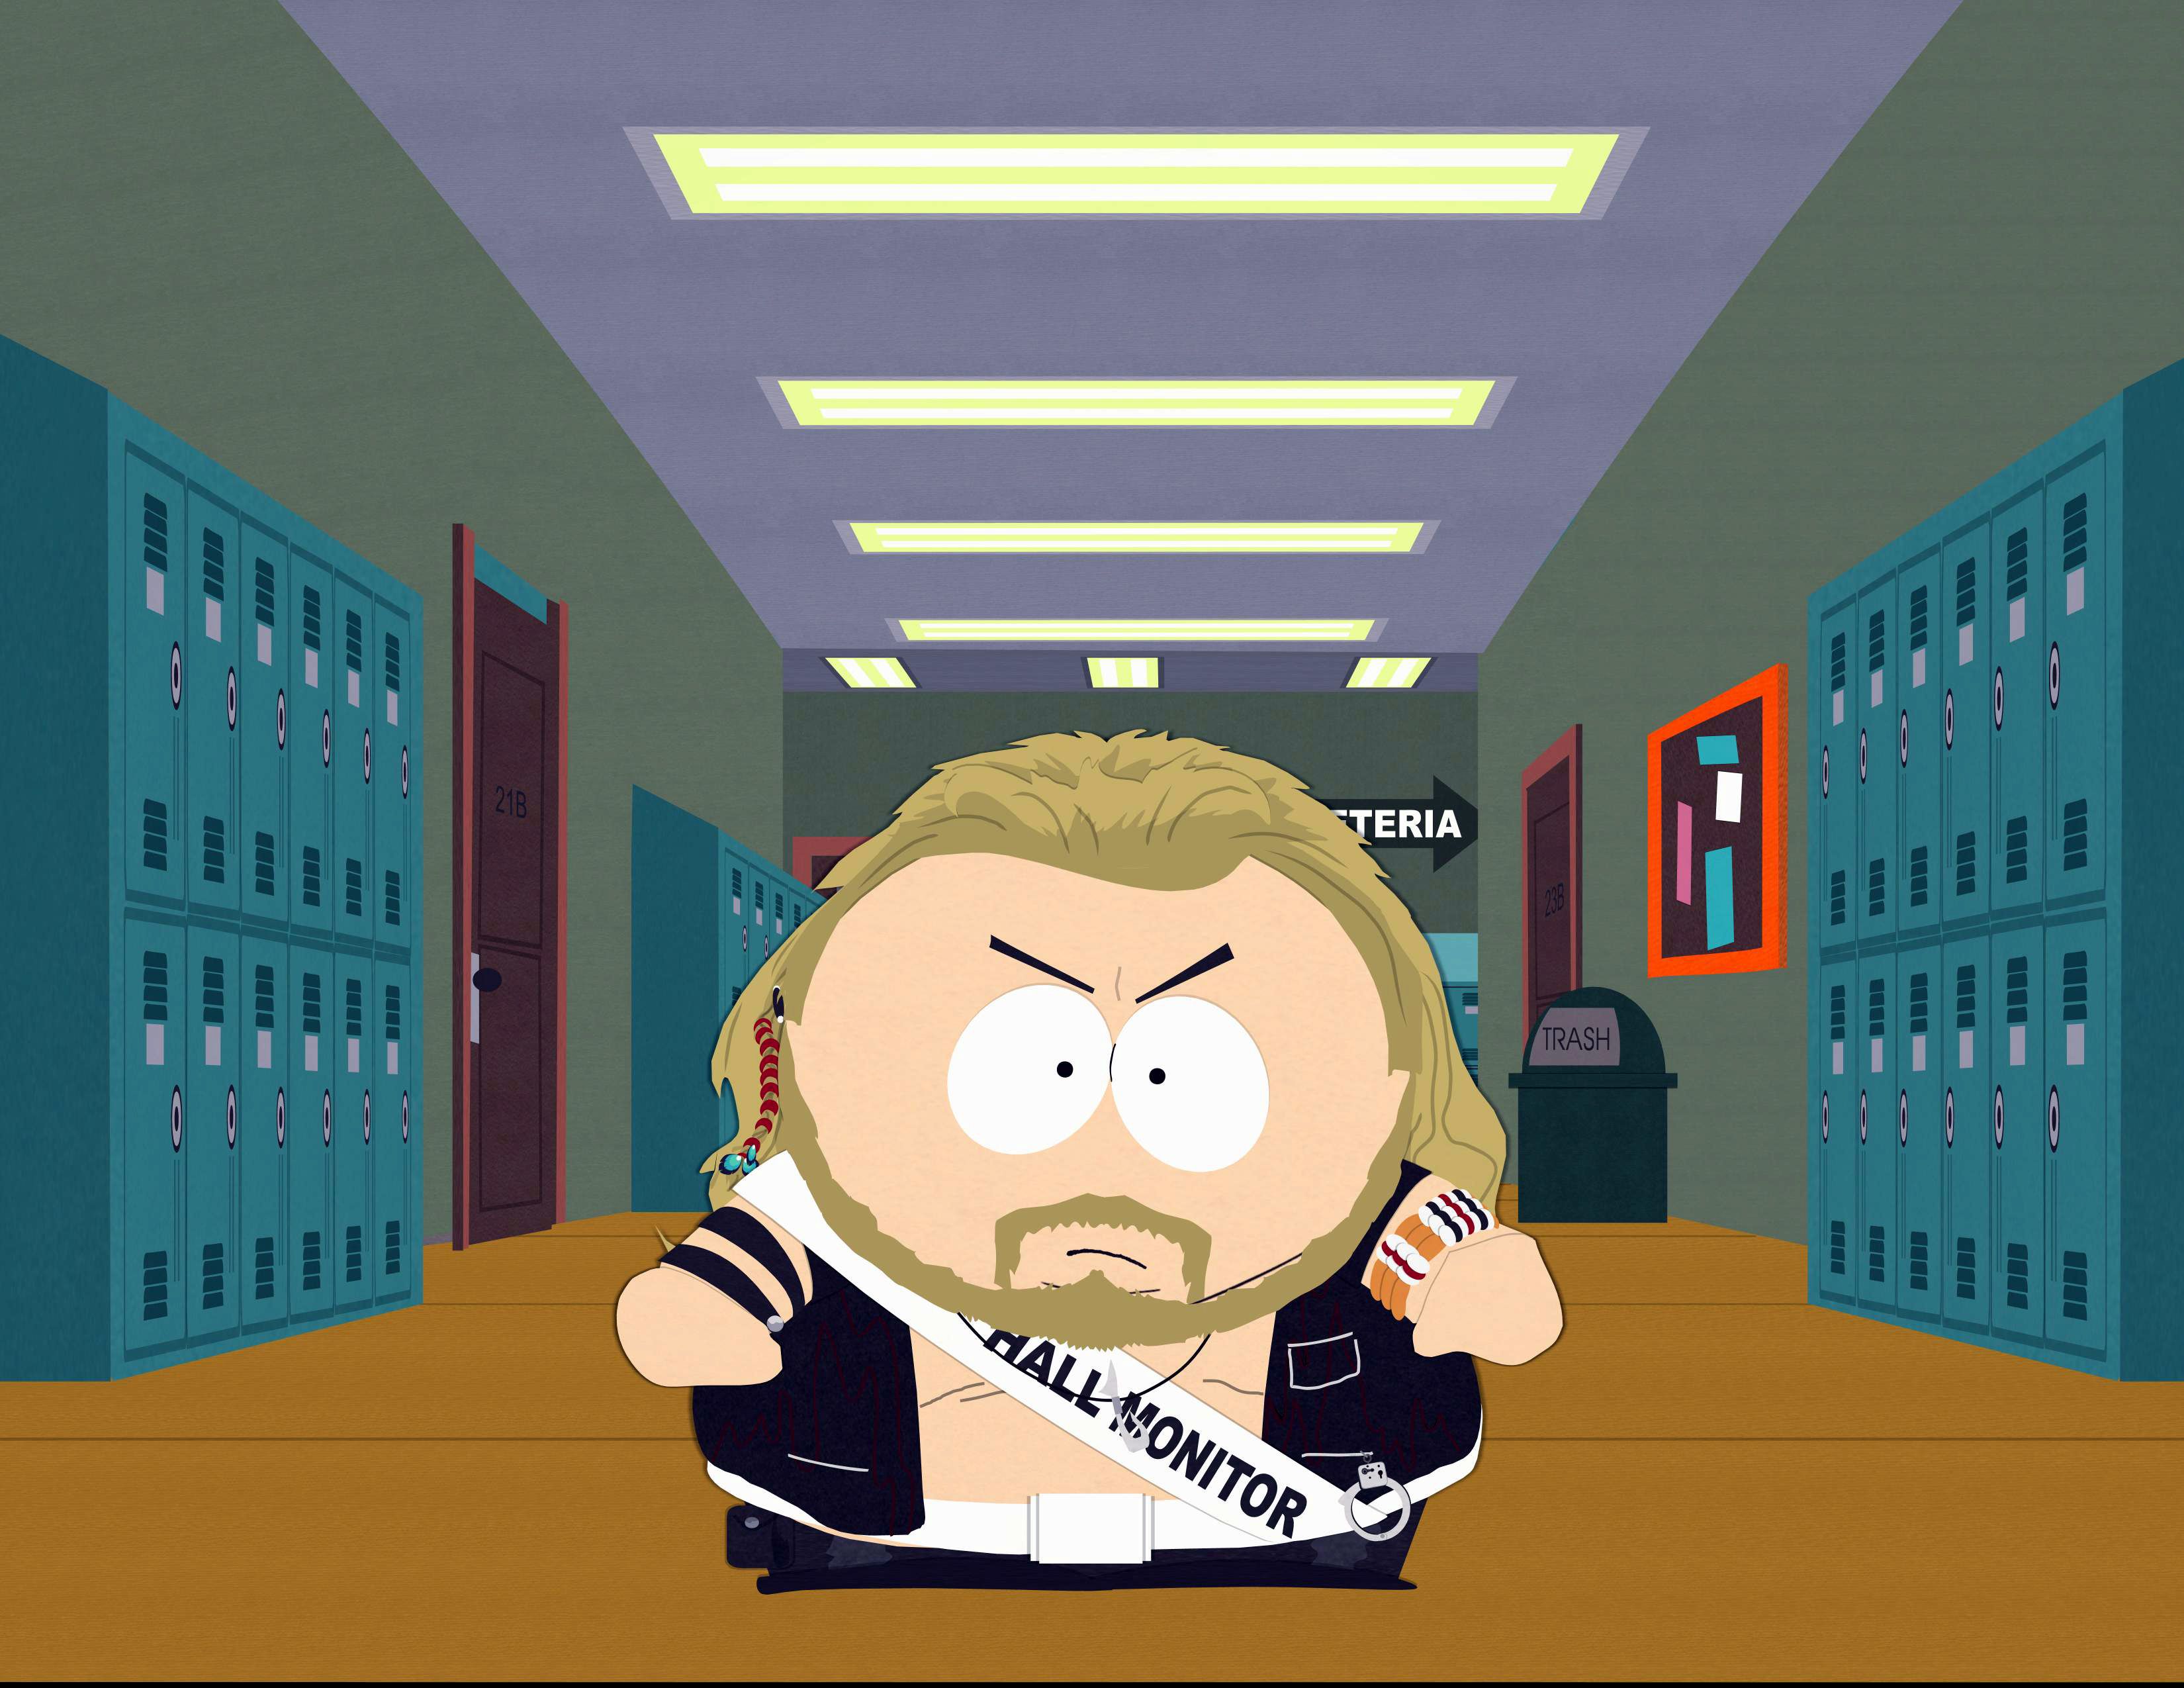 192 South Park HD Wallpapers Backgrounds - Wallpaper Abyss